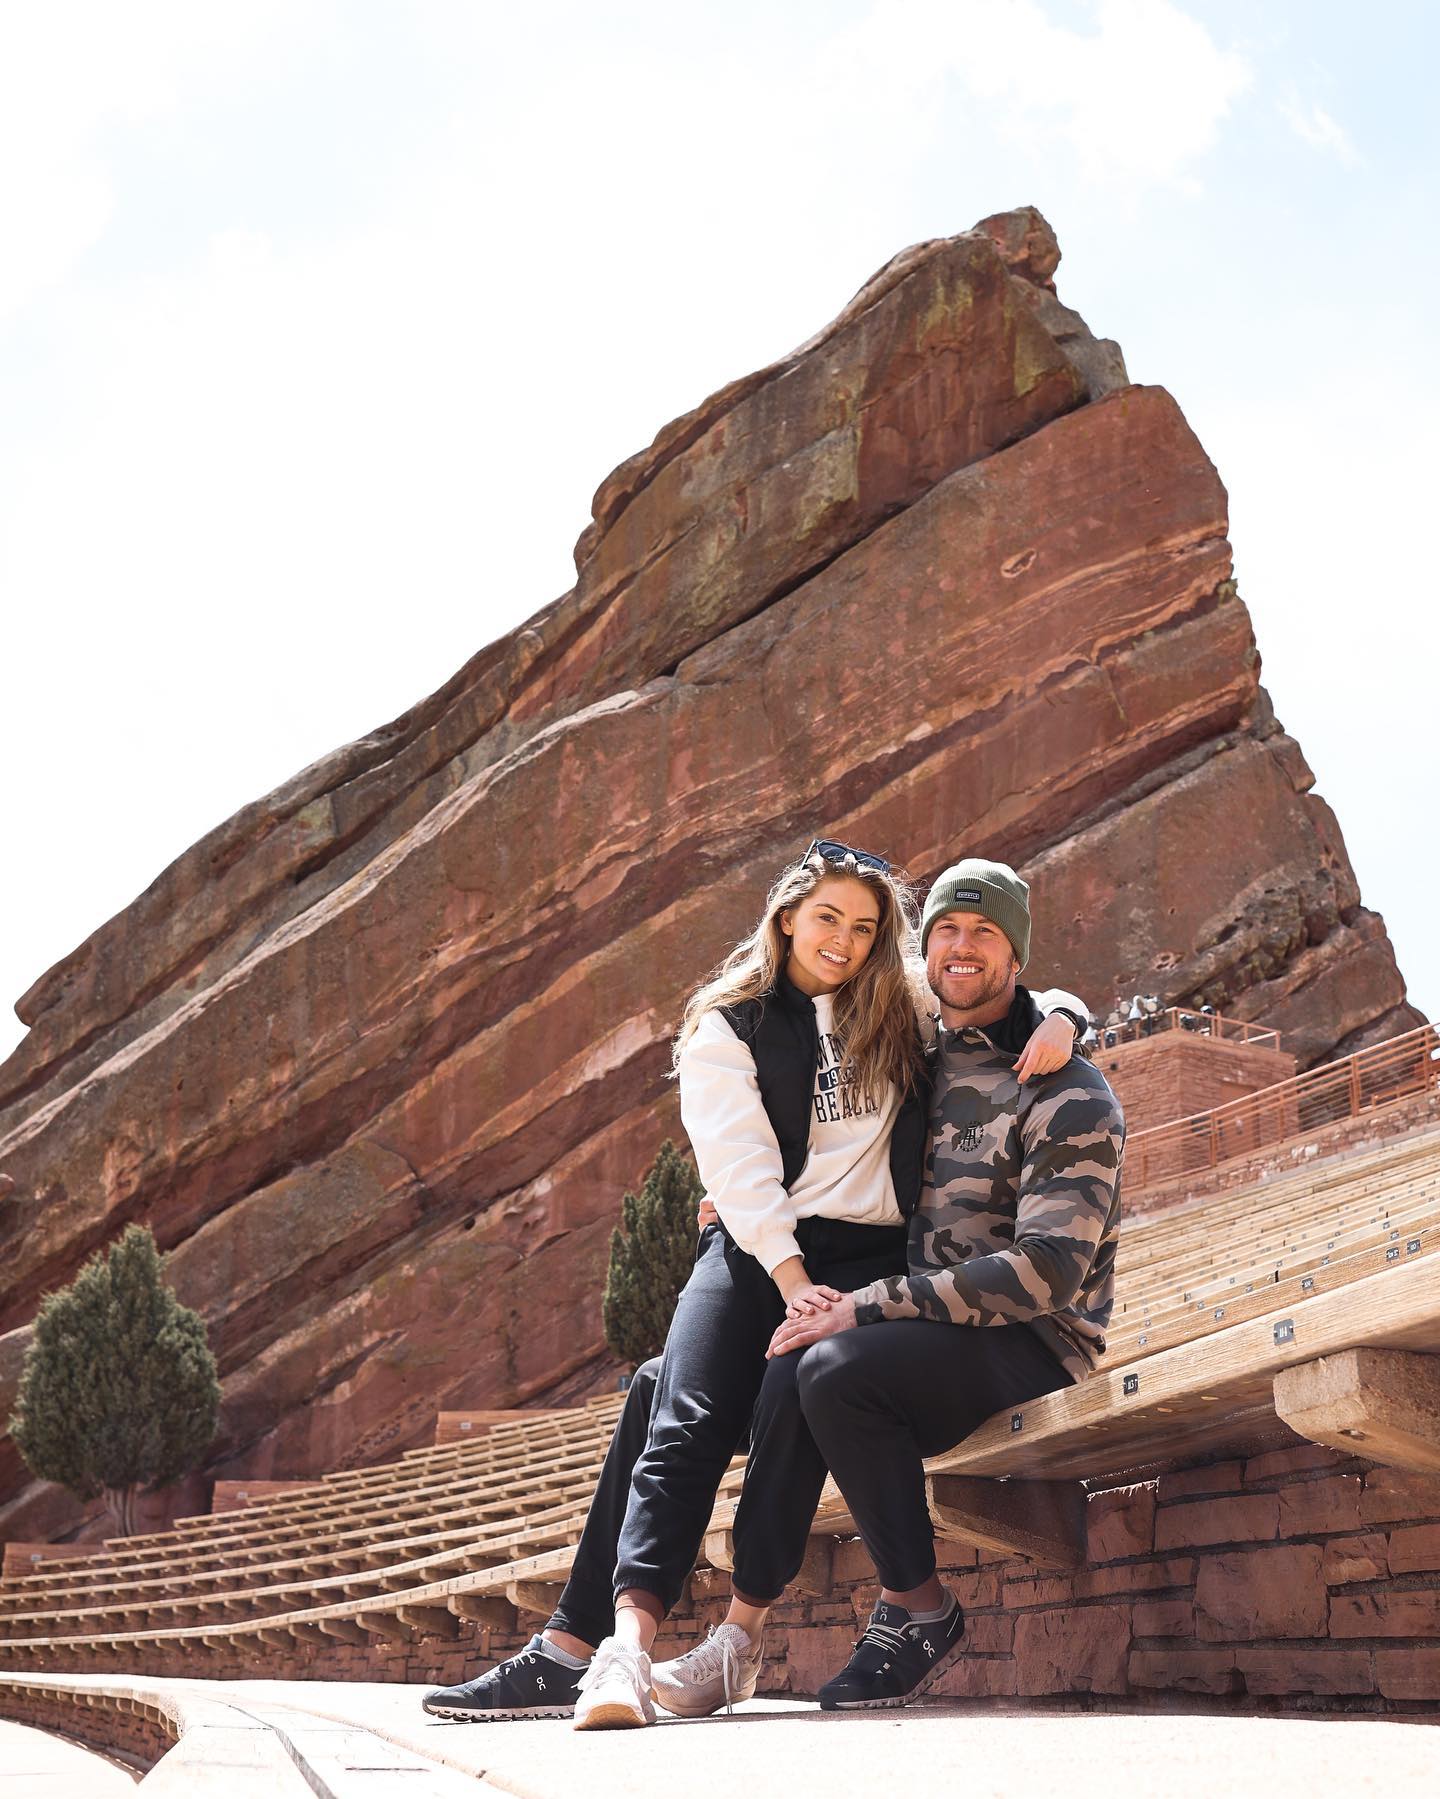 A man and a woman sitting on a large red rock